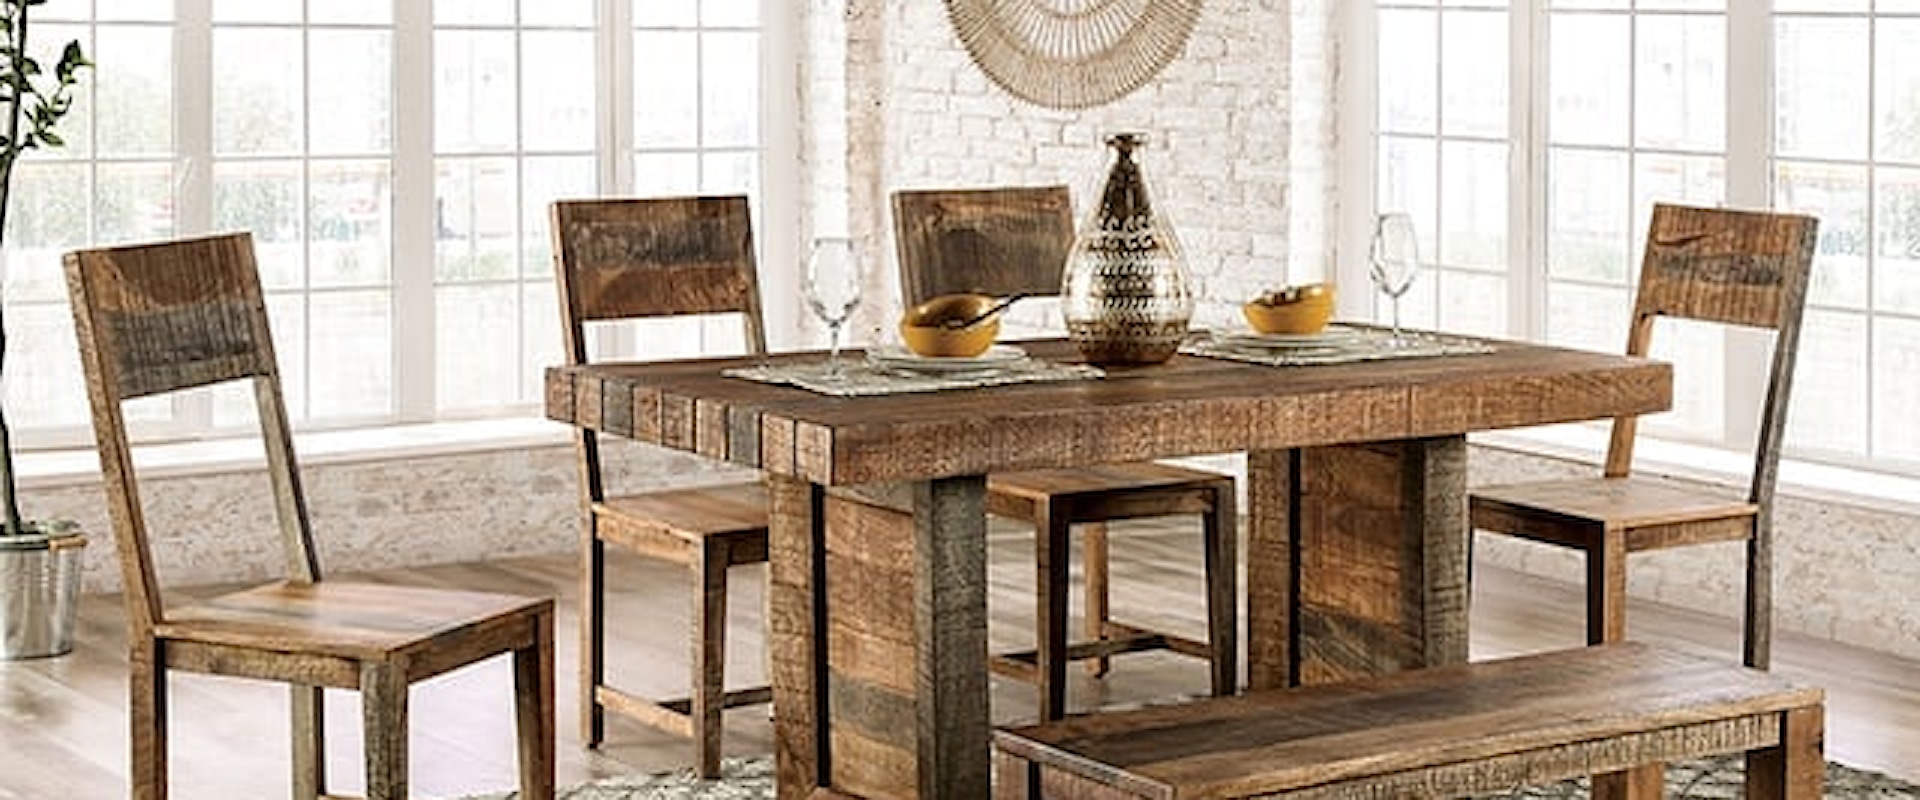 Rustic Solid Wood Dining Set